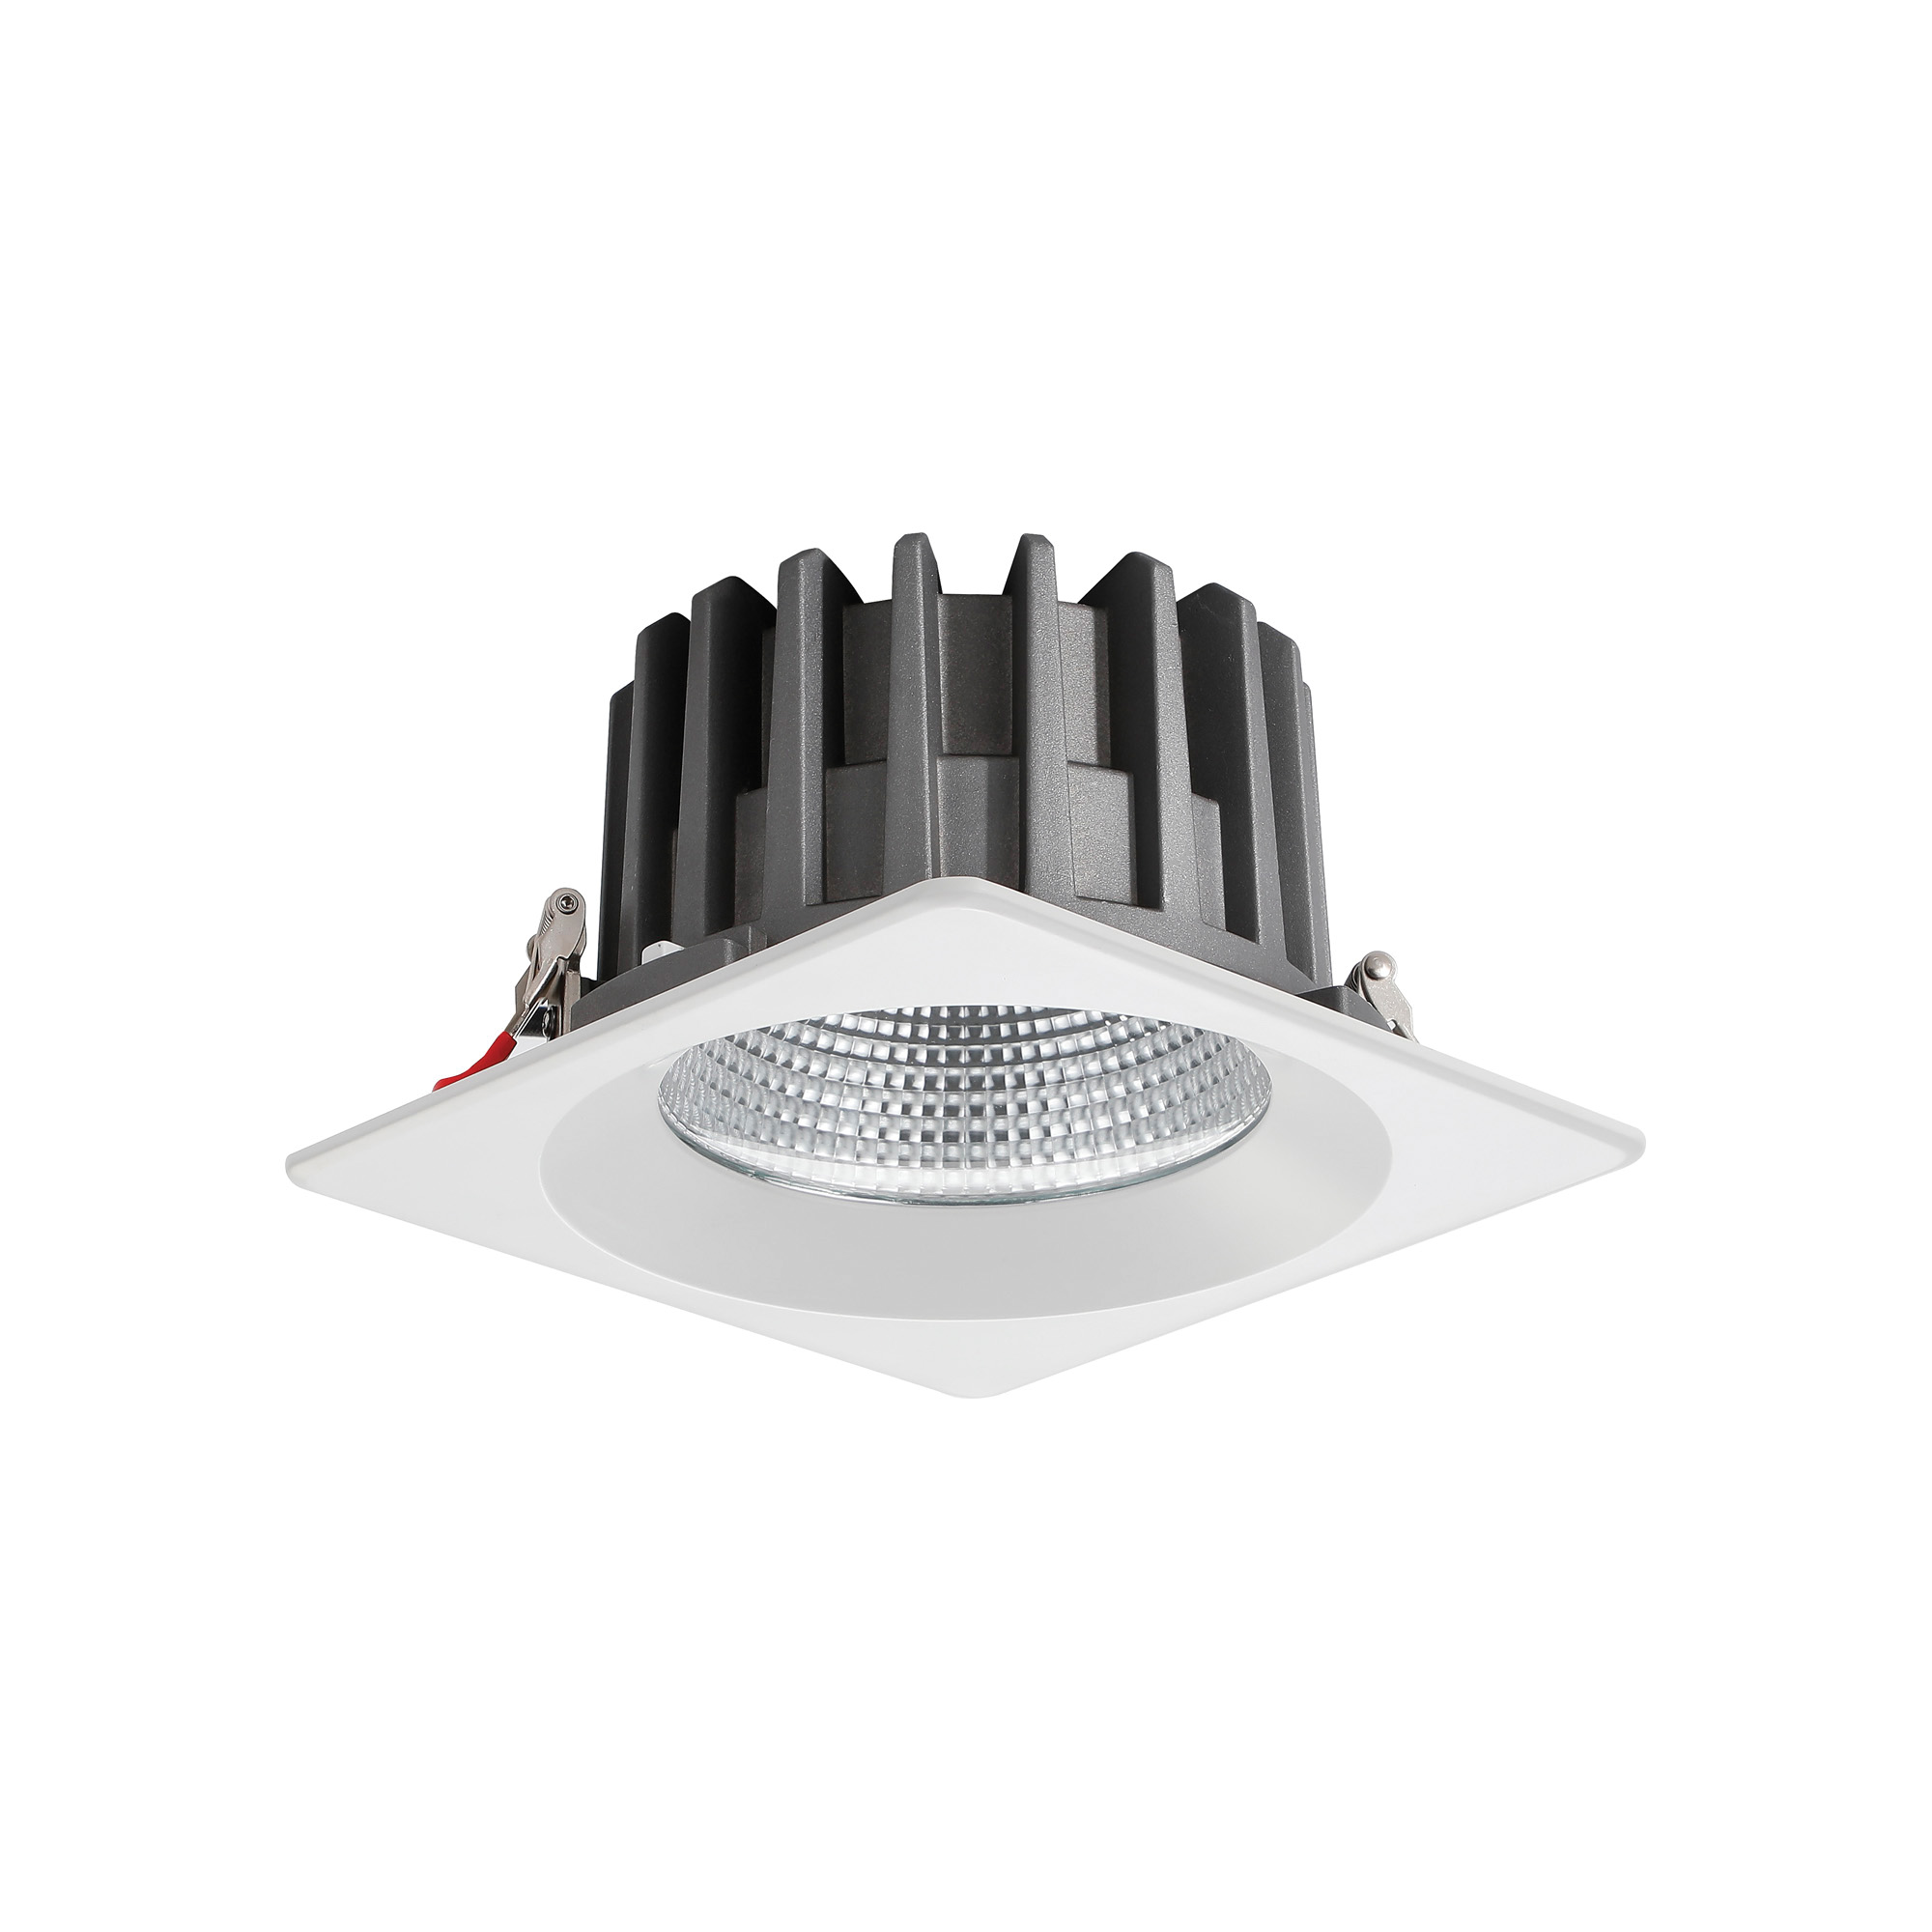 DL200080  Bionic 40, 40W, 1000mA, White Deep Square Recessed Downlight, 3540lm ,Cut Out 175mm, 40° , 4000K, IP44, DRIVER INC., 5yrs Warranty.